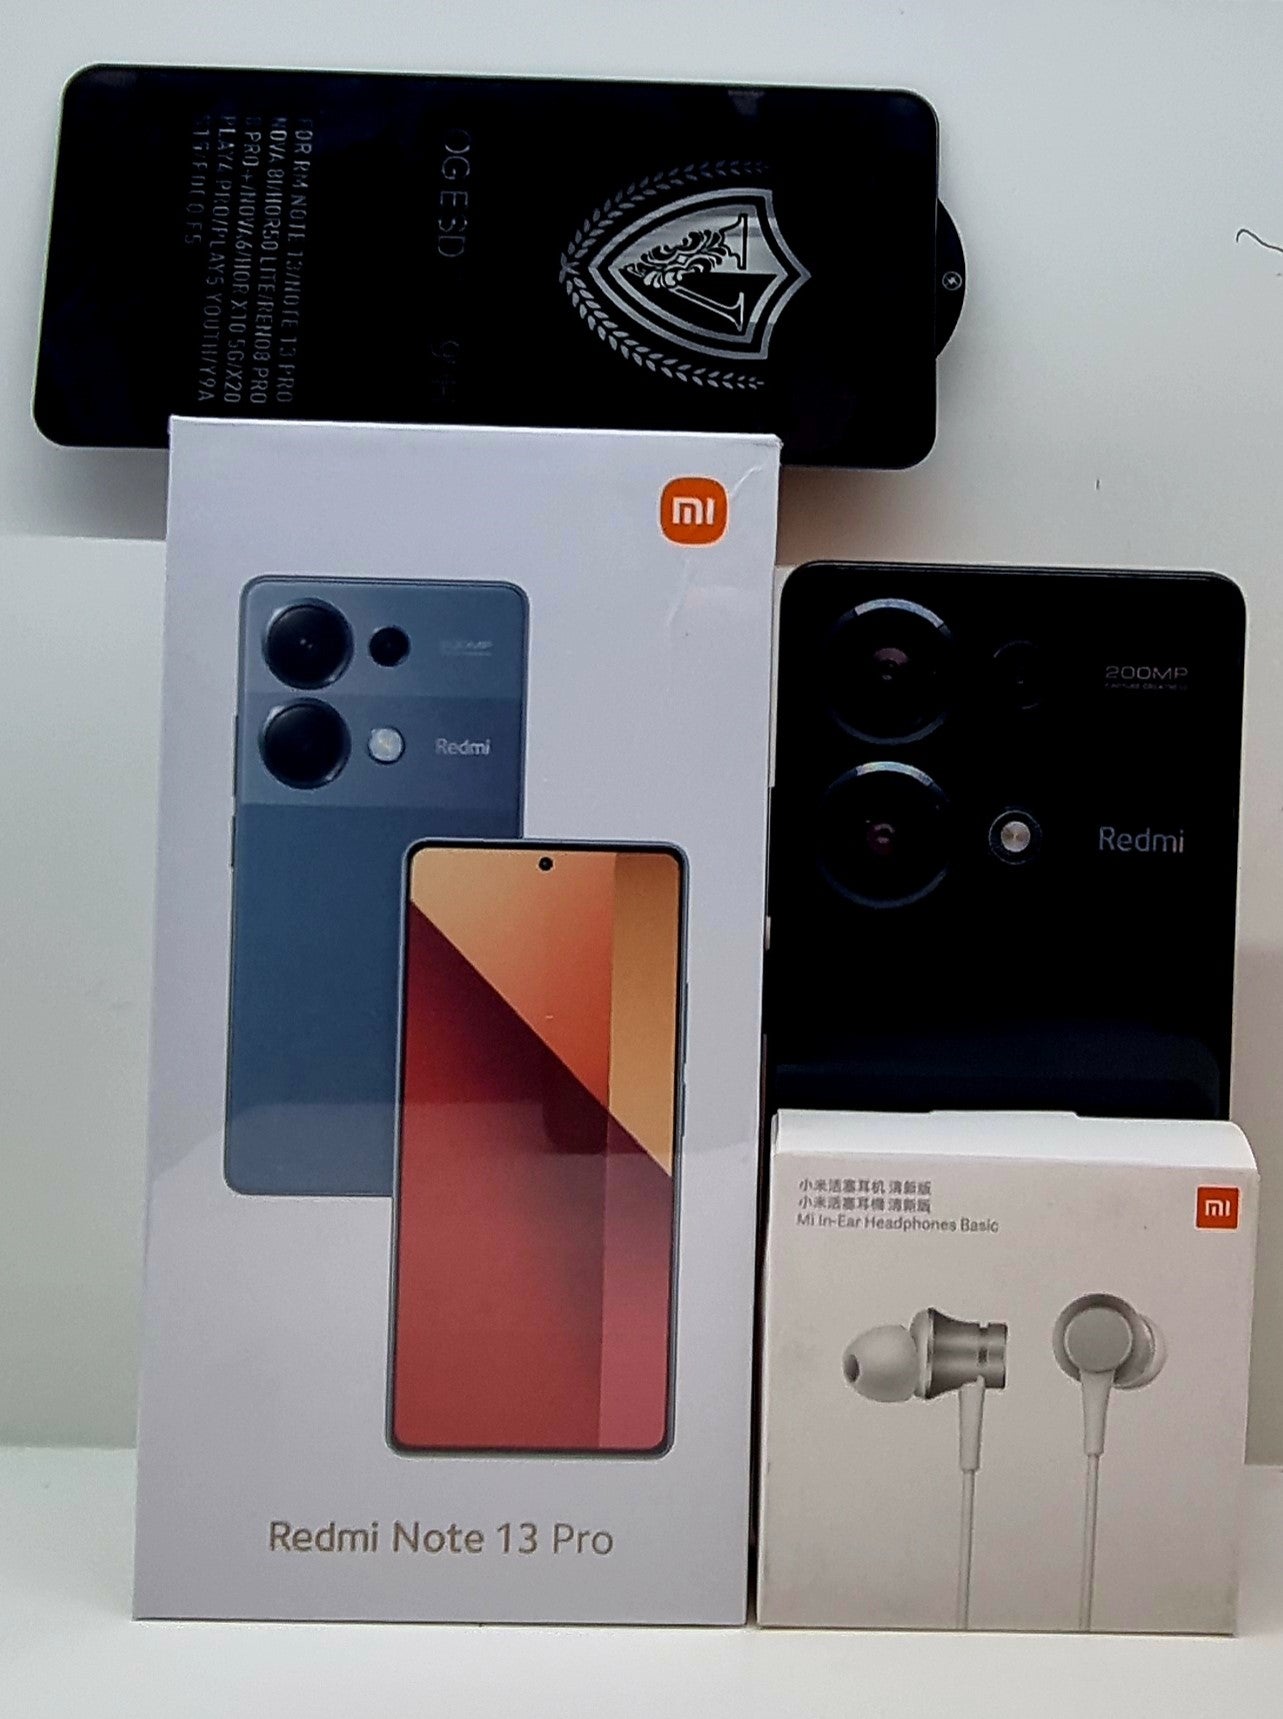 Redmi Note 13 Pro 12+512, Get Free Mi in Ear Headphones and Screen Protector